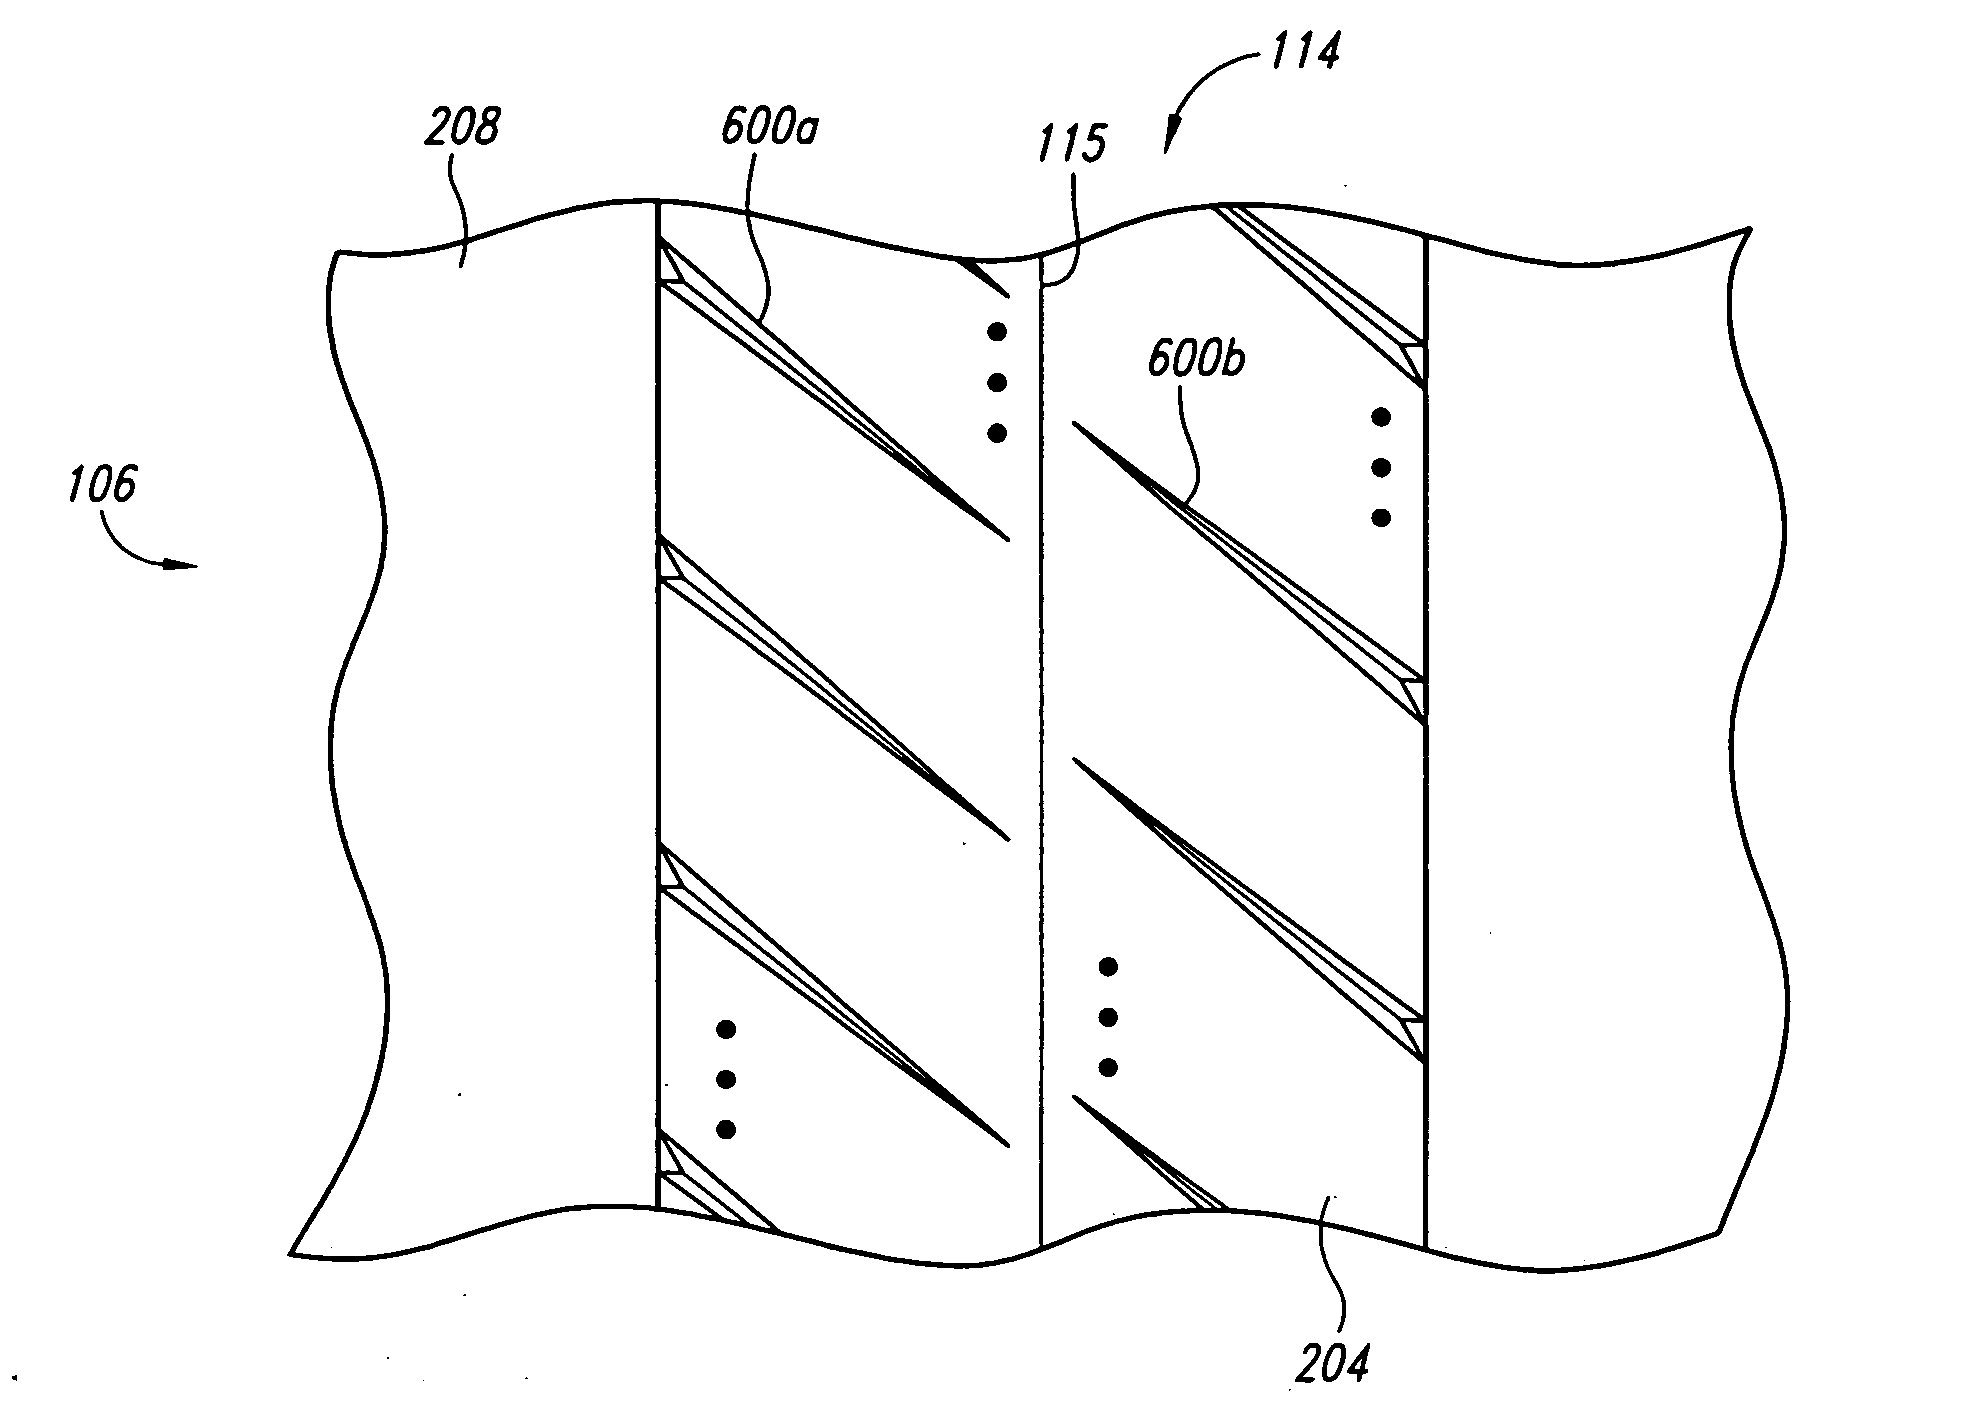 Fuel cell water management system and method